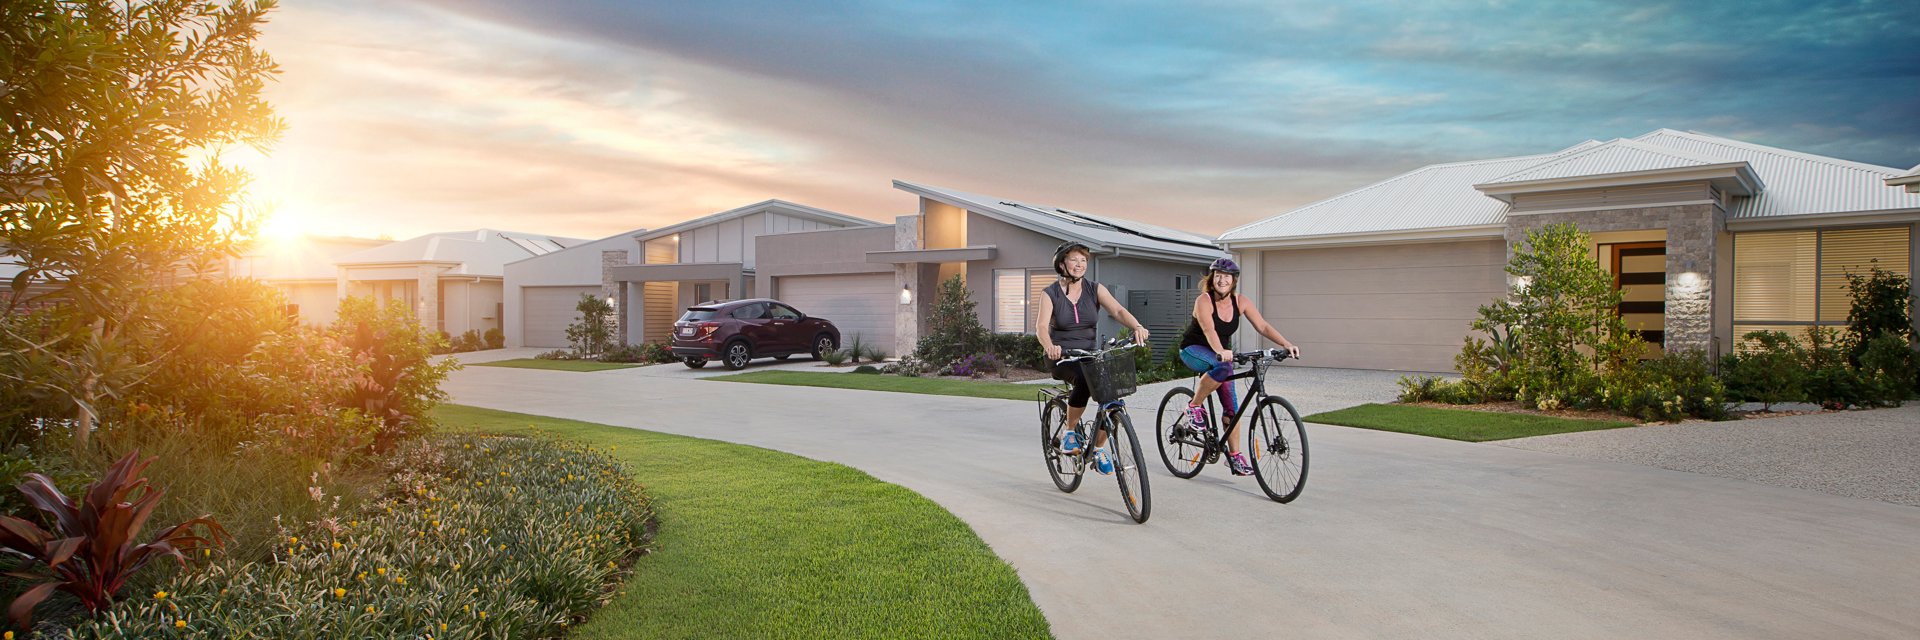 2 ladies ride bikes in the Stockland Halcyon Lakeside community